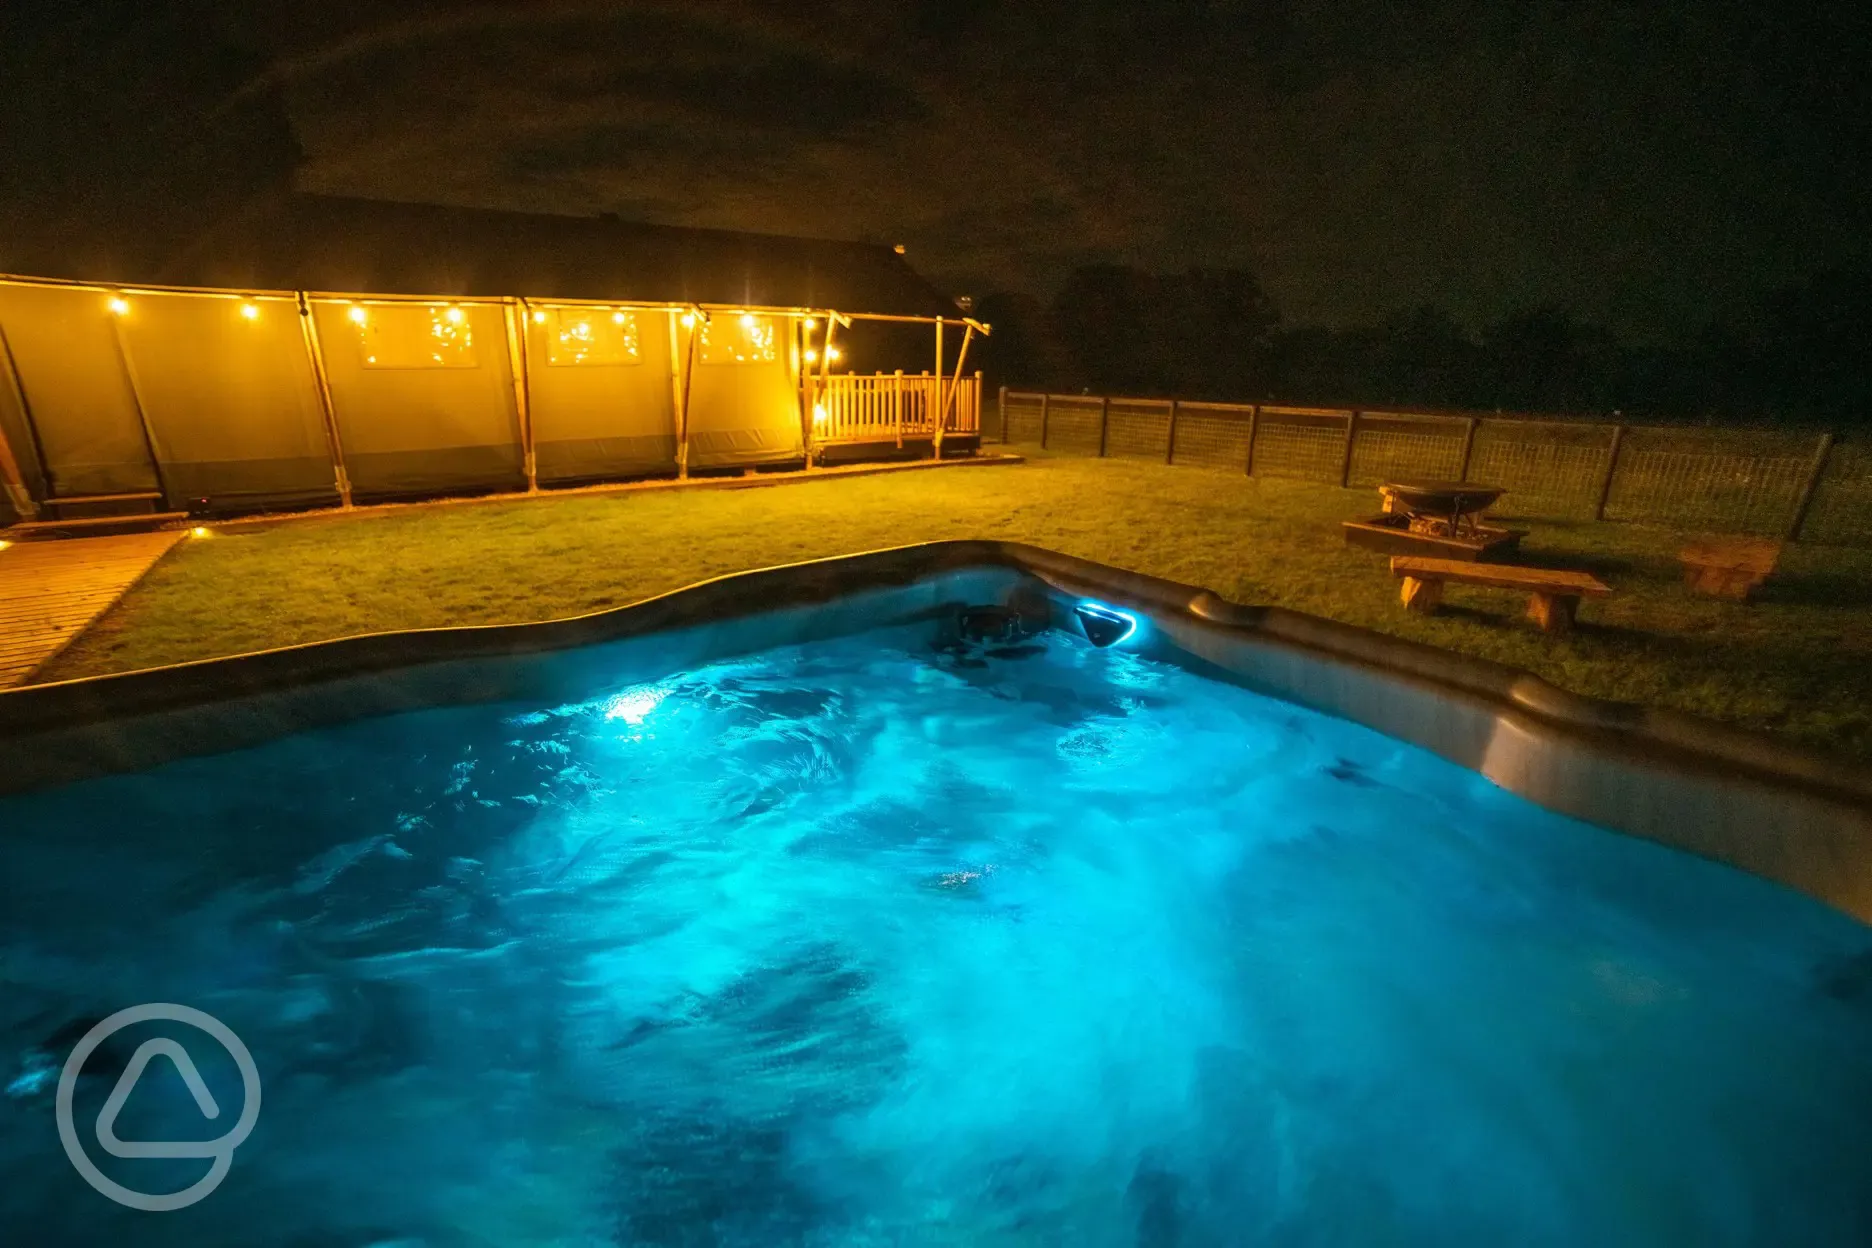 Hot tub with northern light LEDs makes an evening soak very special